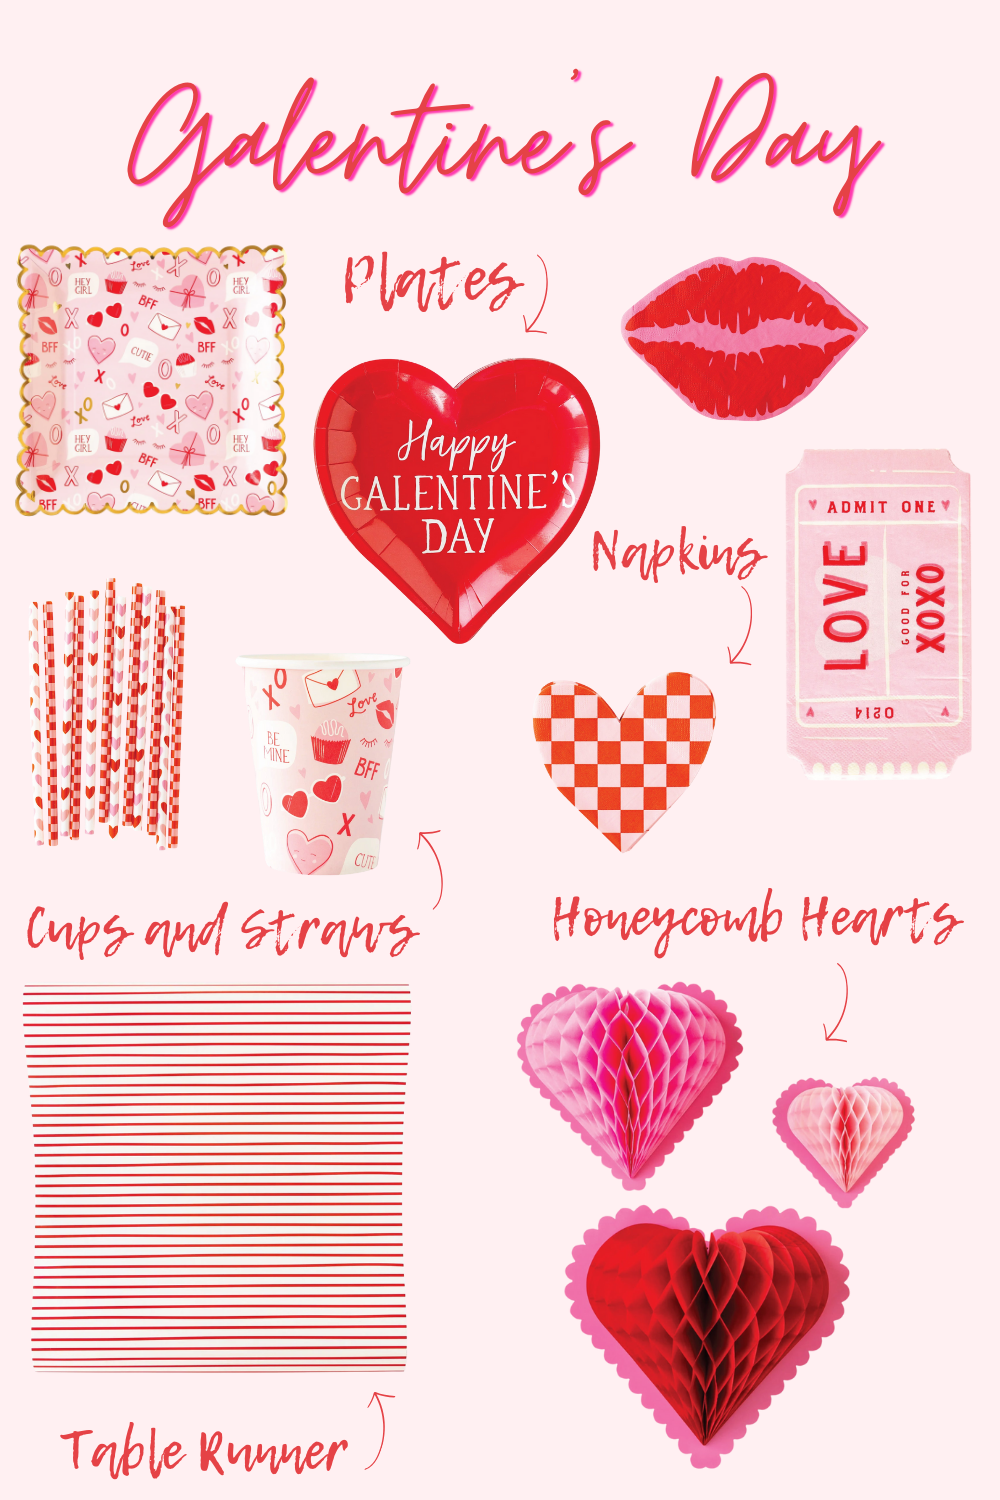 Galentine's Day Party Decor | The Party Darling